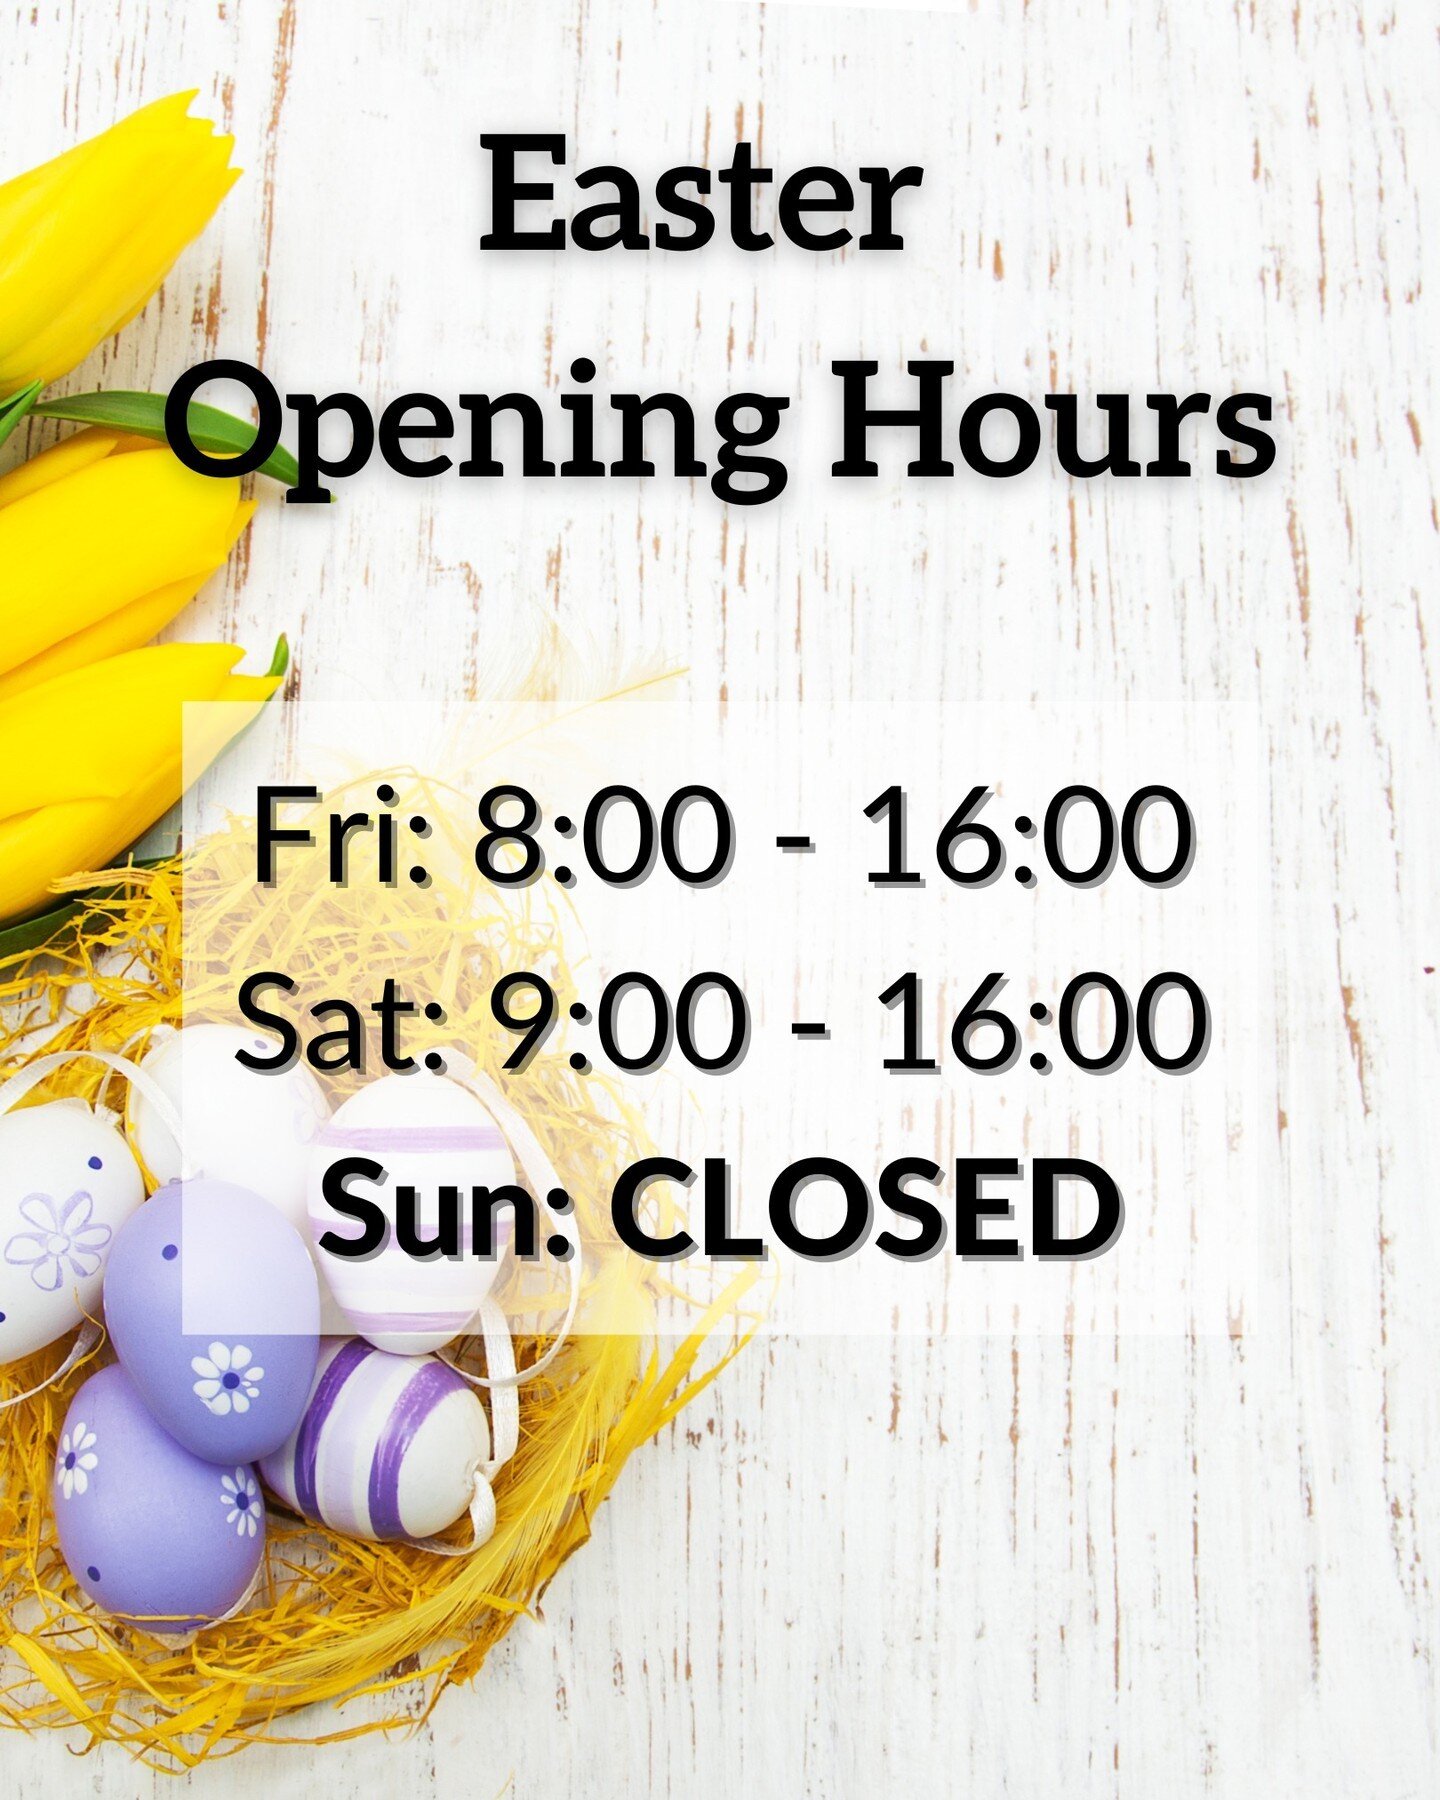 Easter Opening Hours ||
Heads up - we will be closed on Easter Sunday!
#fltrcoffee #langfordvillage #specialitycoffee #easteropeninghours #eastersunday